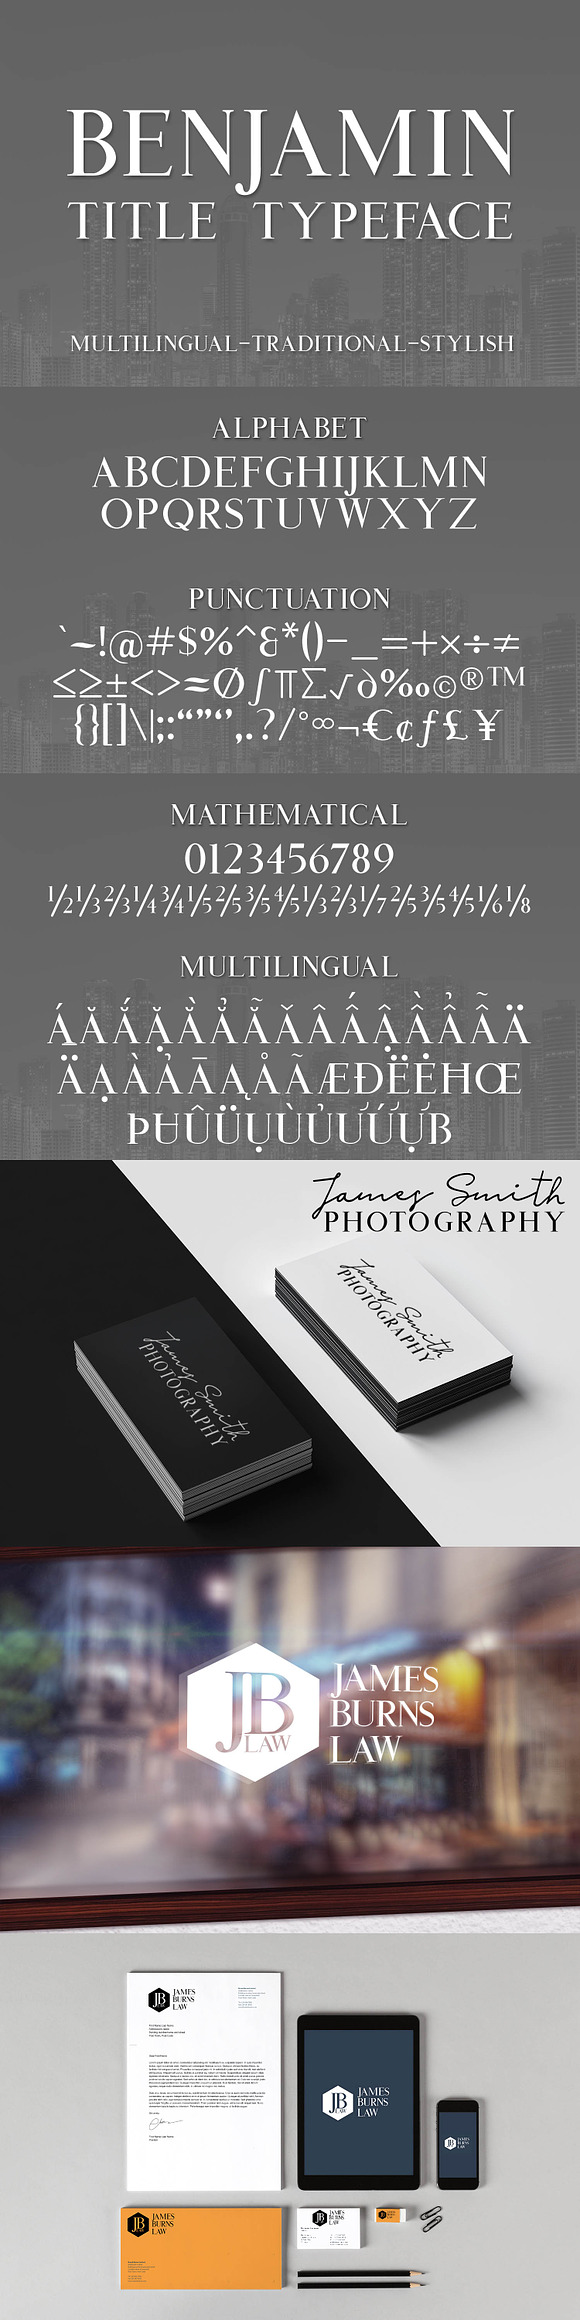 Benjamin Title Typeface in Serif Fonts - product preview 6